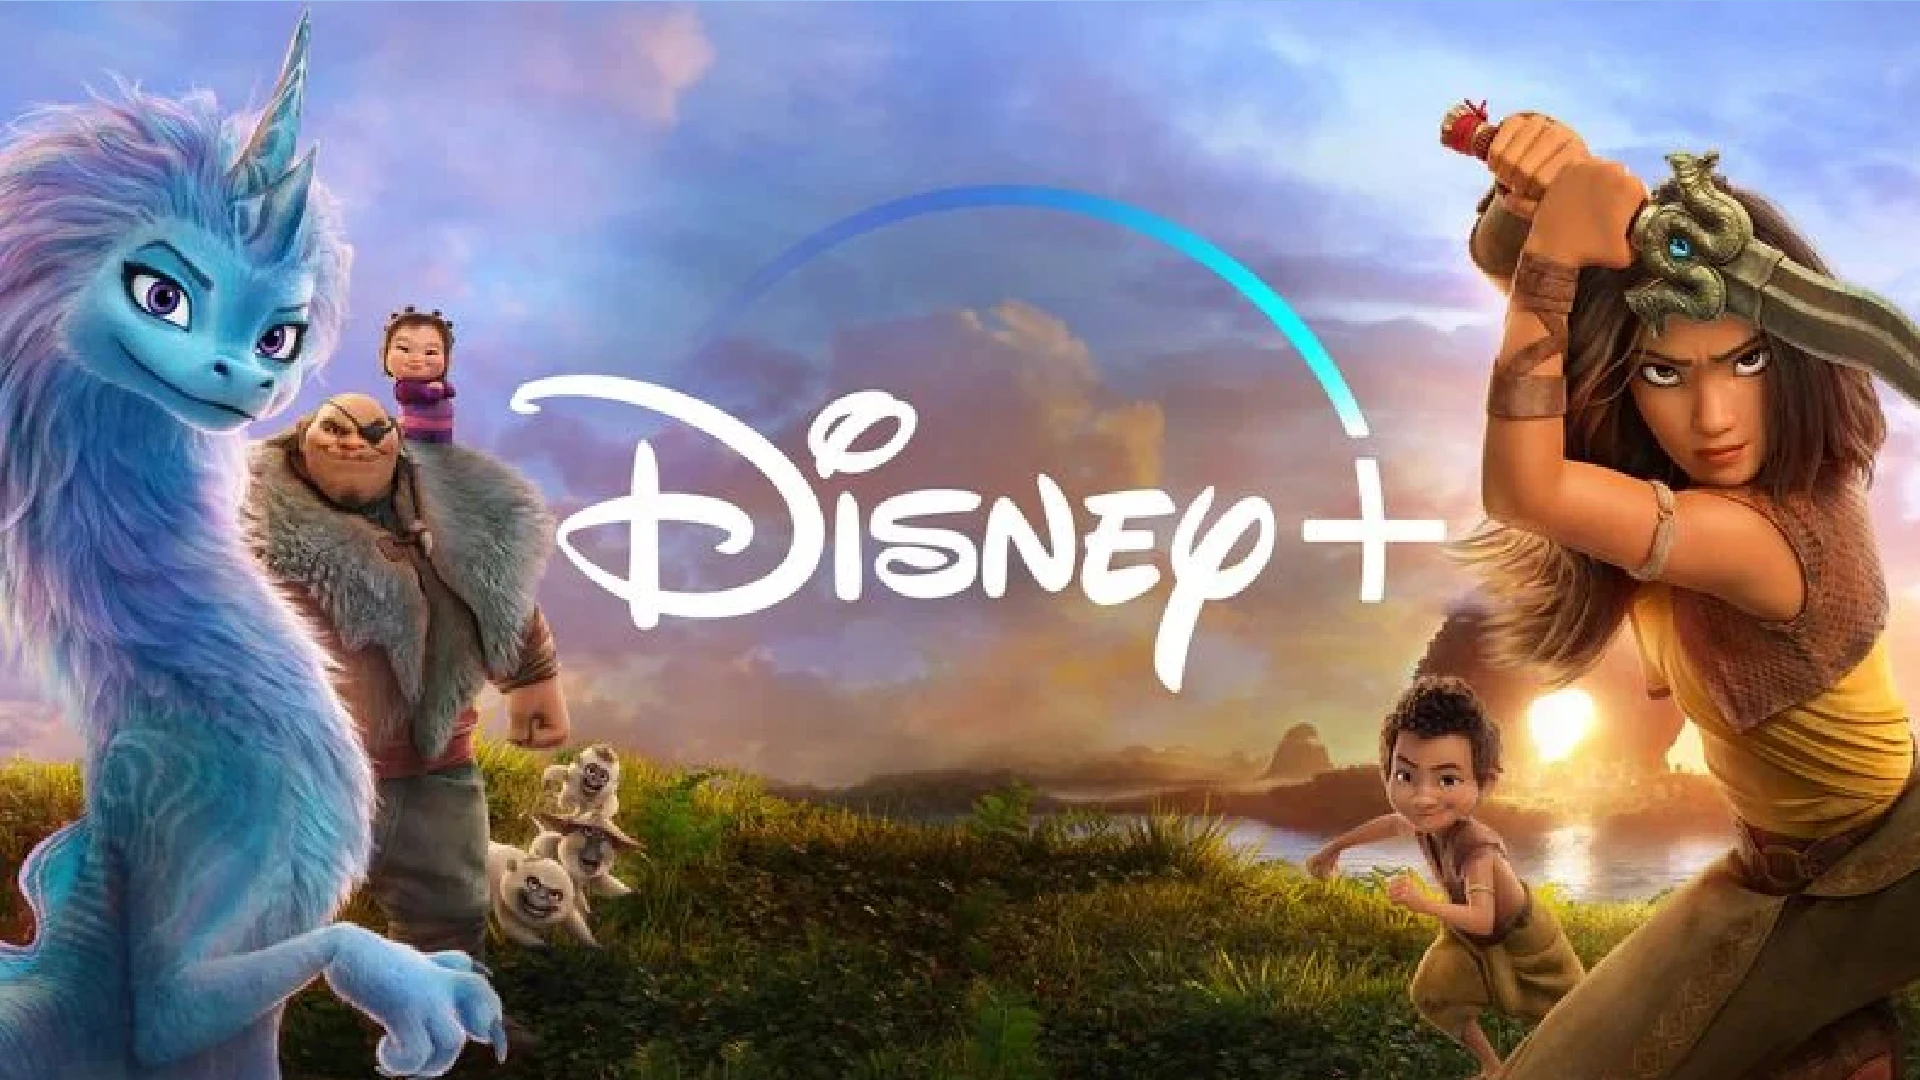 Disney To Launch Cheap, ADisney To Launch Cheap, Ad-supported Version Of Disney+ In 2022d-supported Version Of Disney+ In 2022